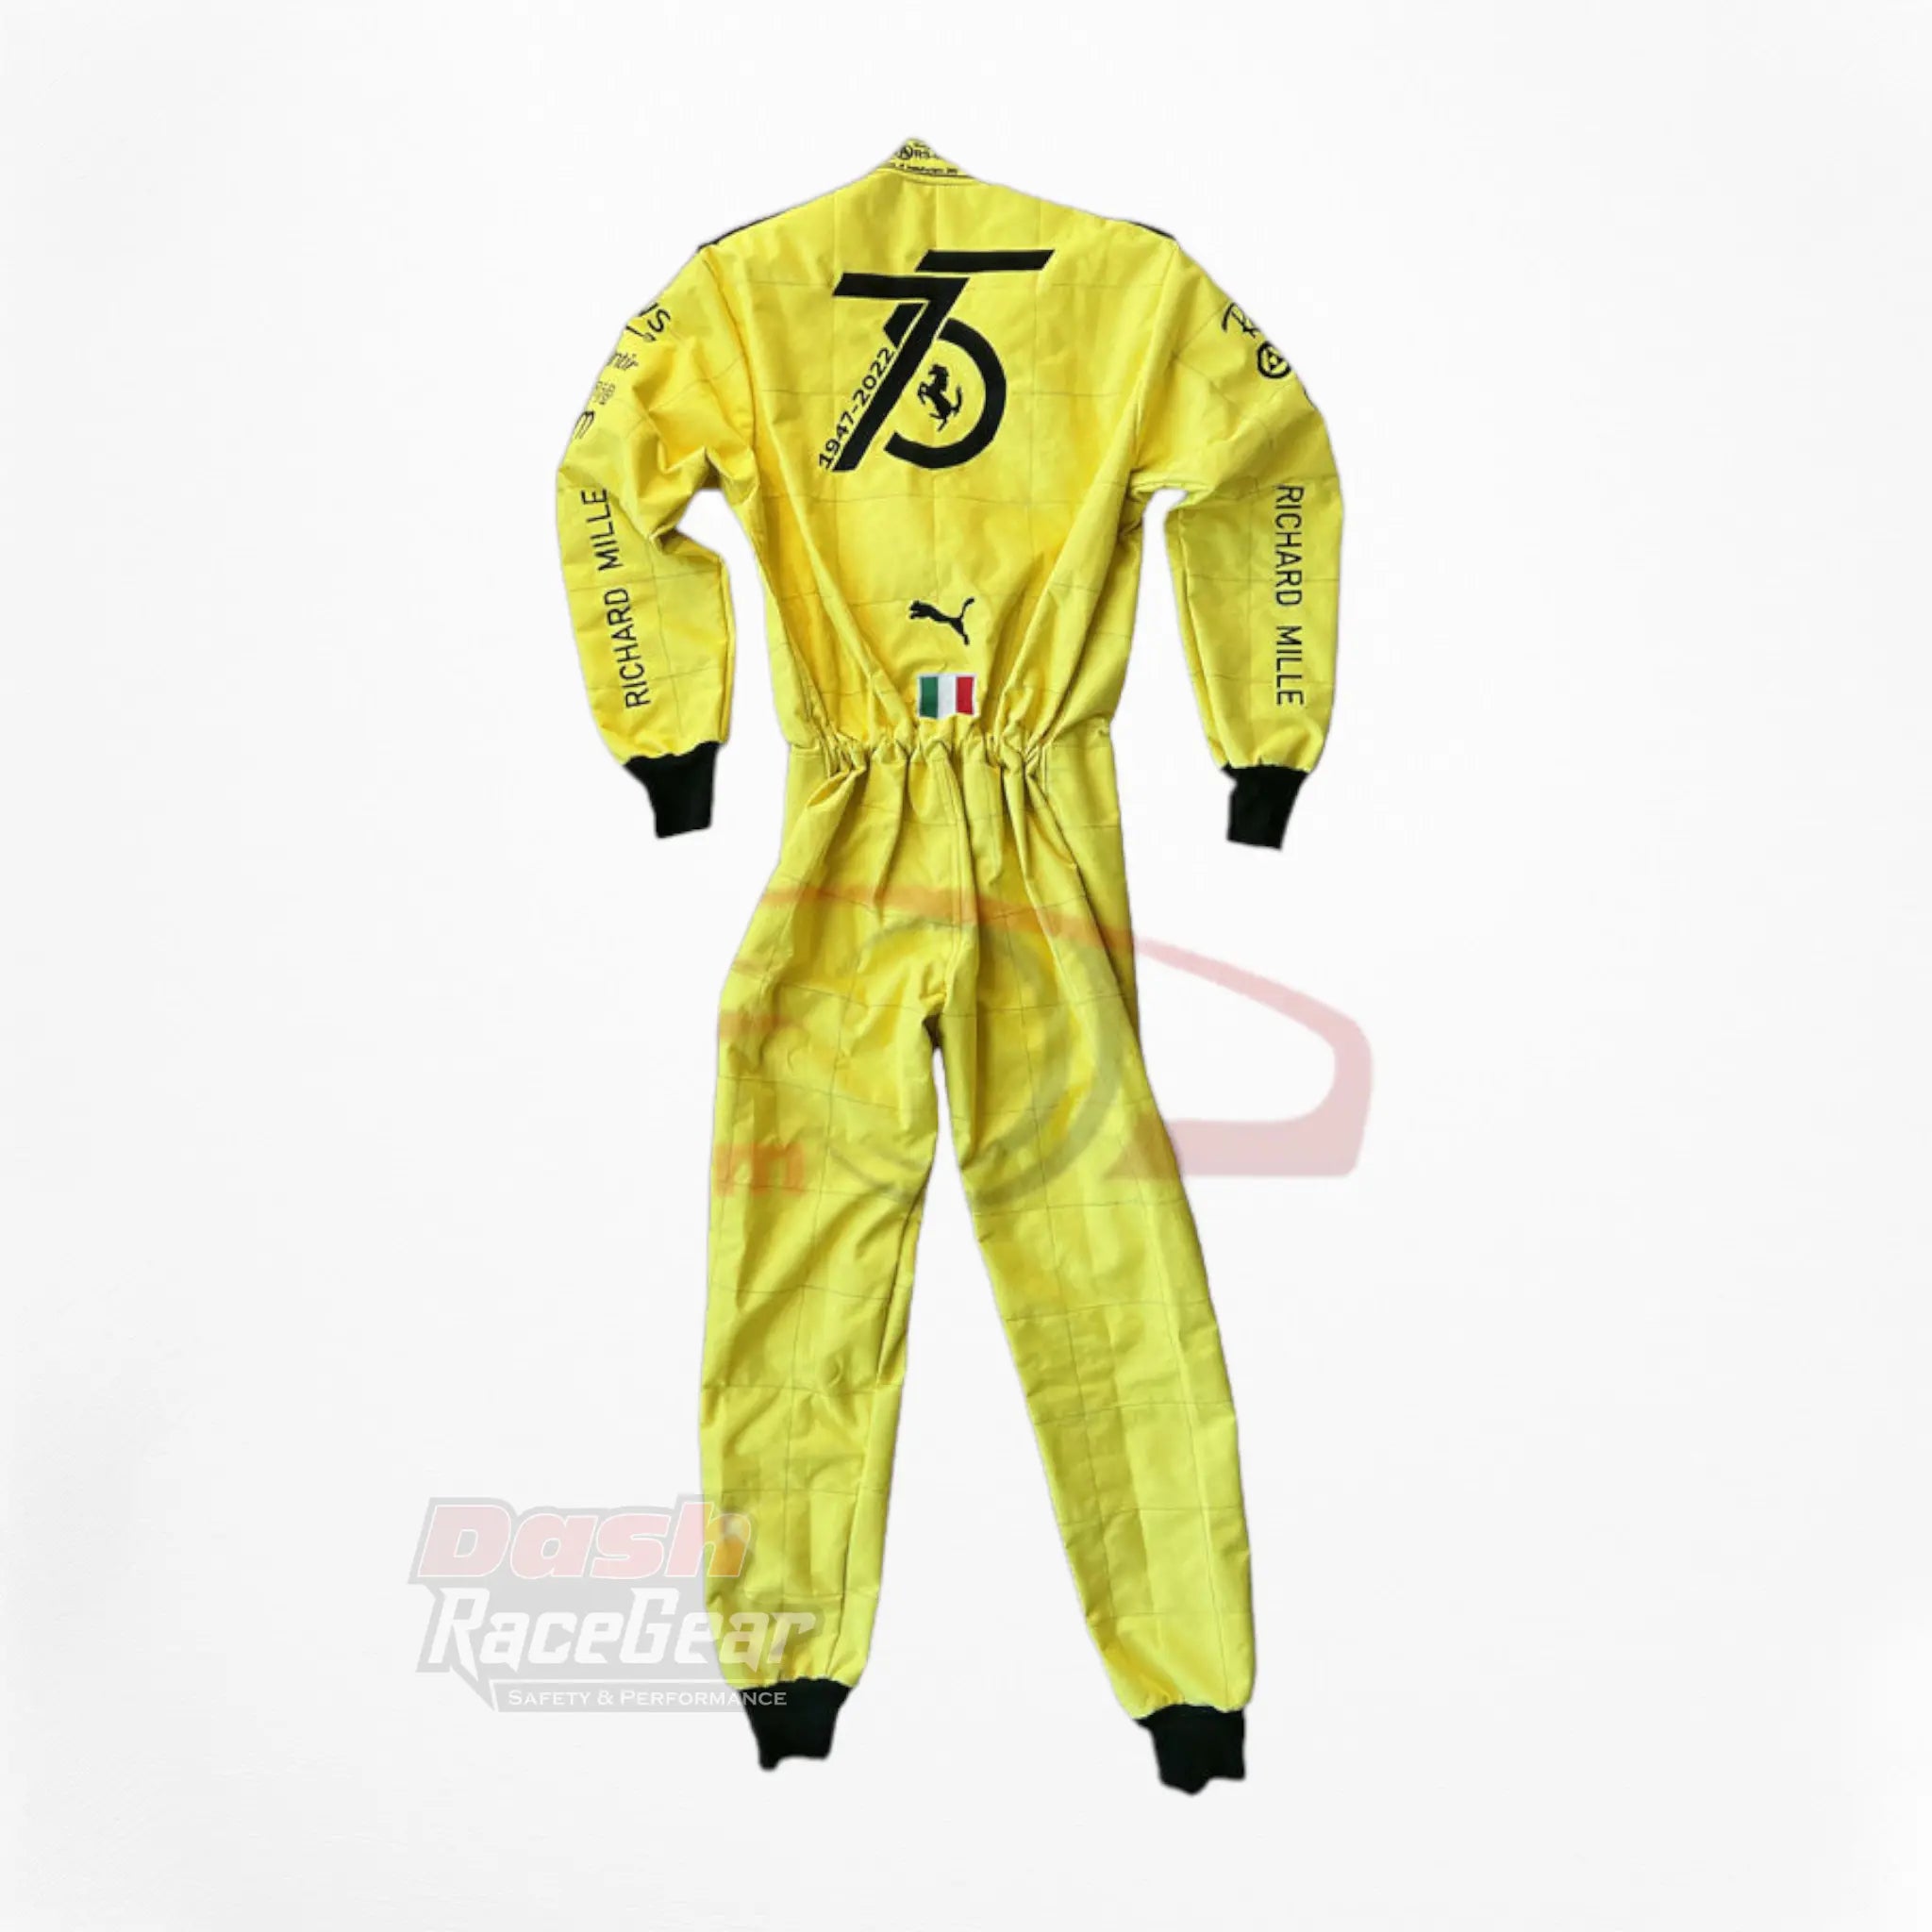 2022 Charles Leclerc Ferrari F1 Embroidered Racing Suit - MONZA GP